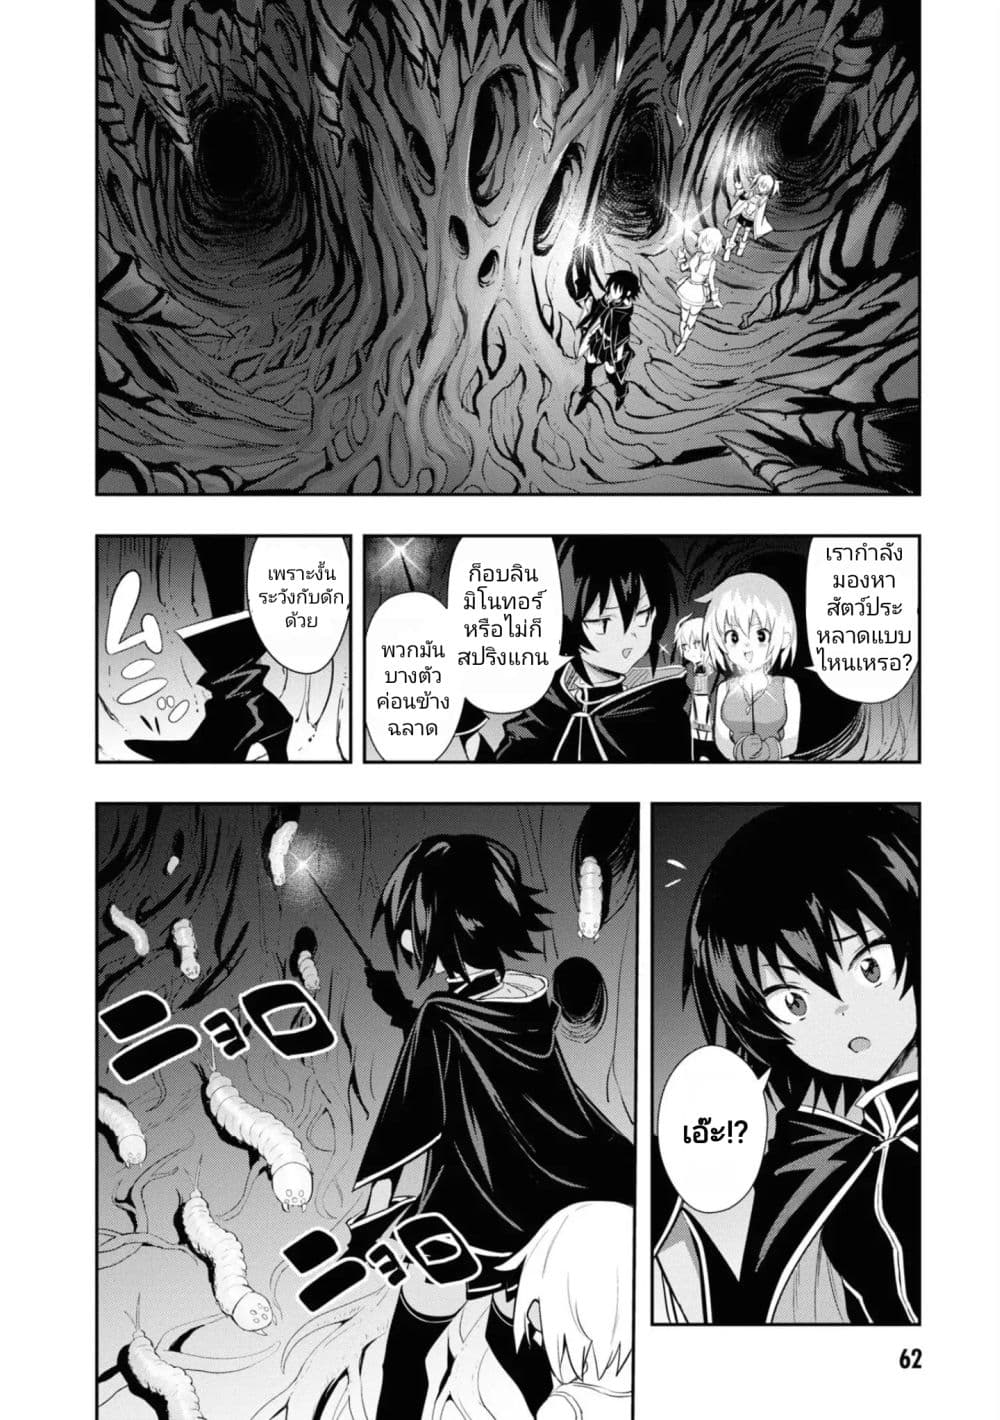 Witch Guild Fantasia 7 (14)